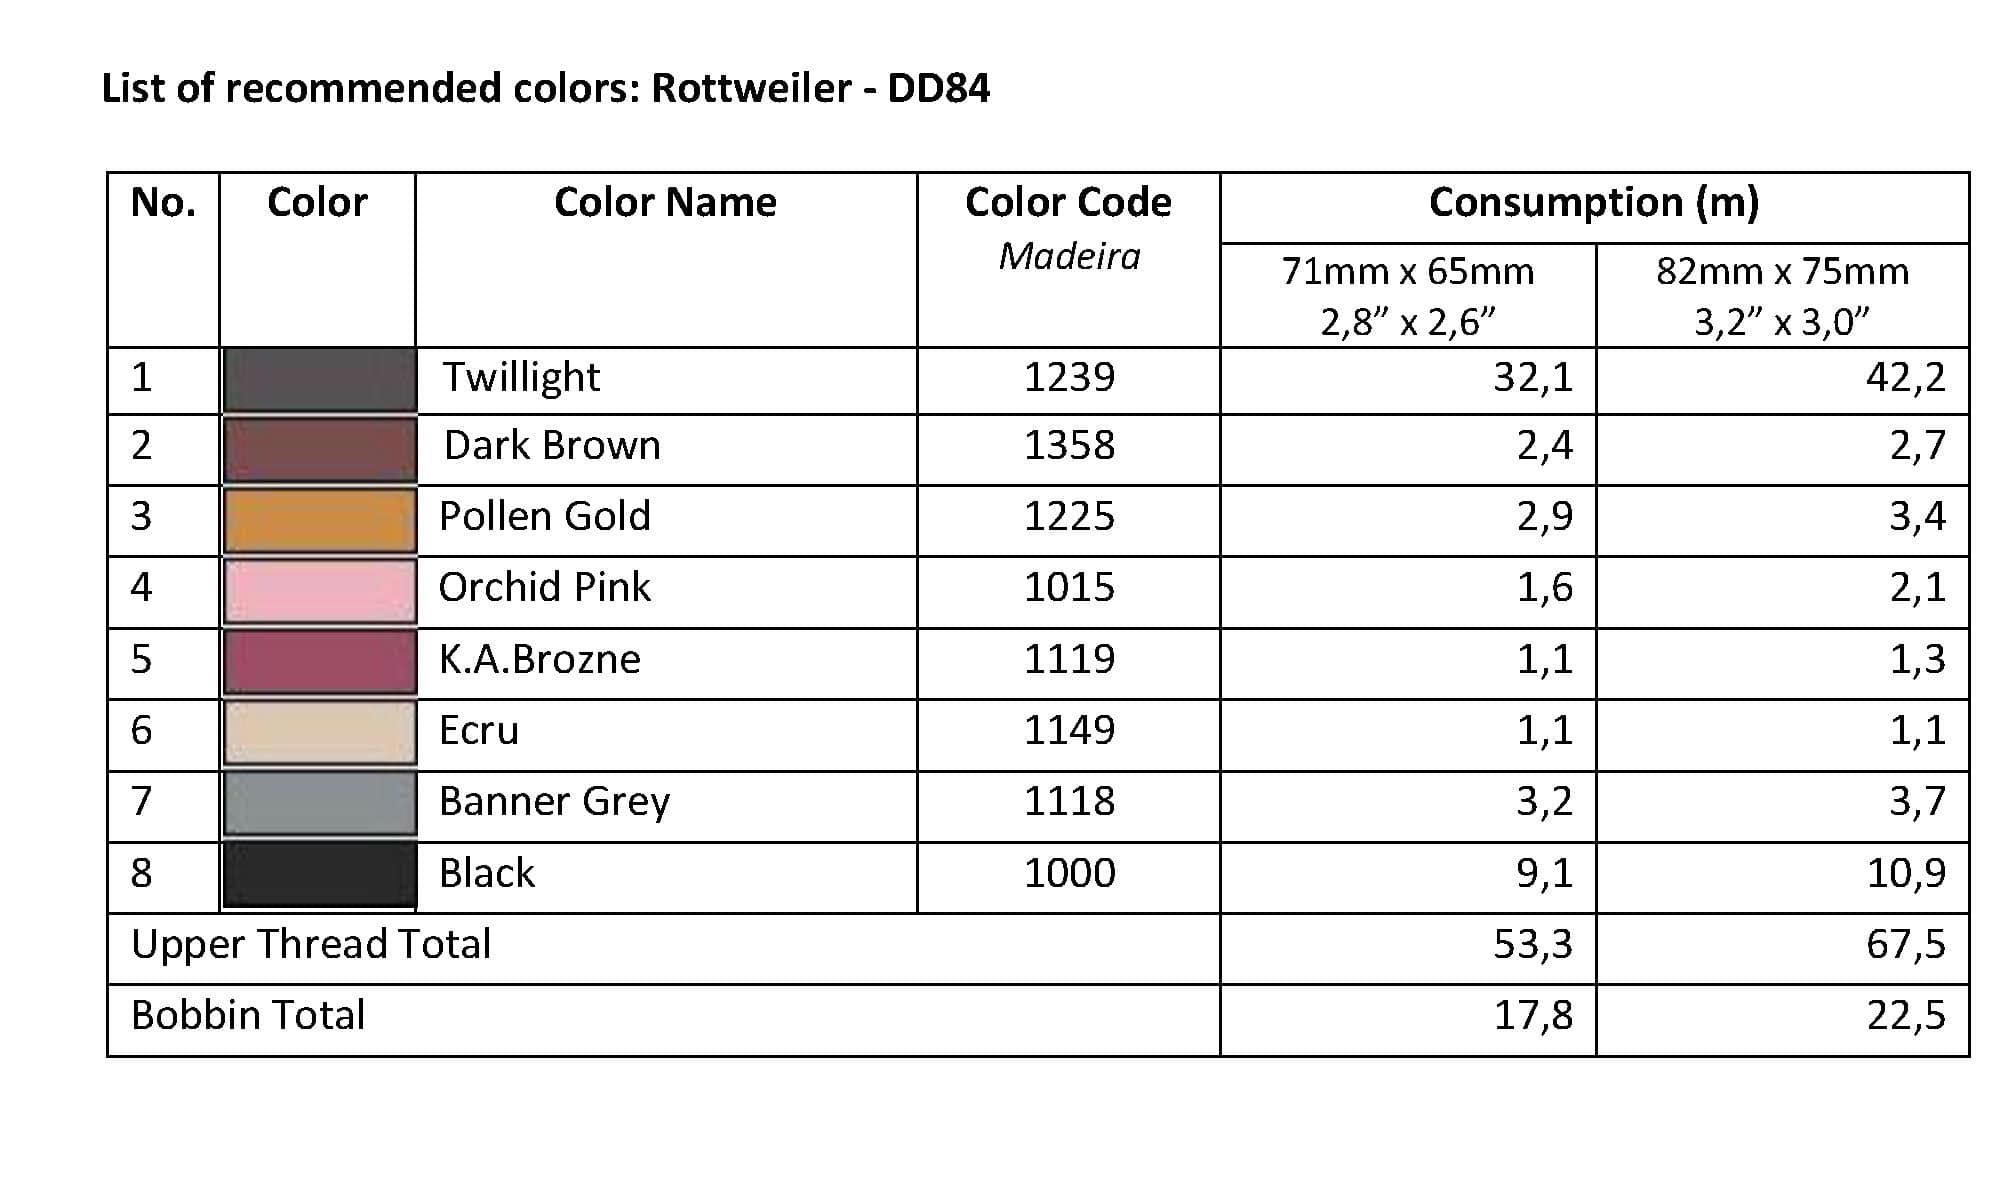 List of Recommended Colors -  Rottweiler DD84